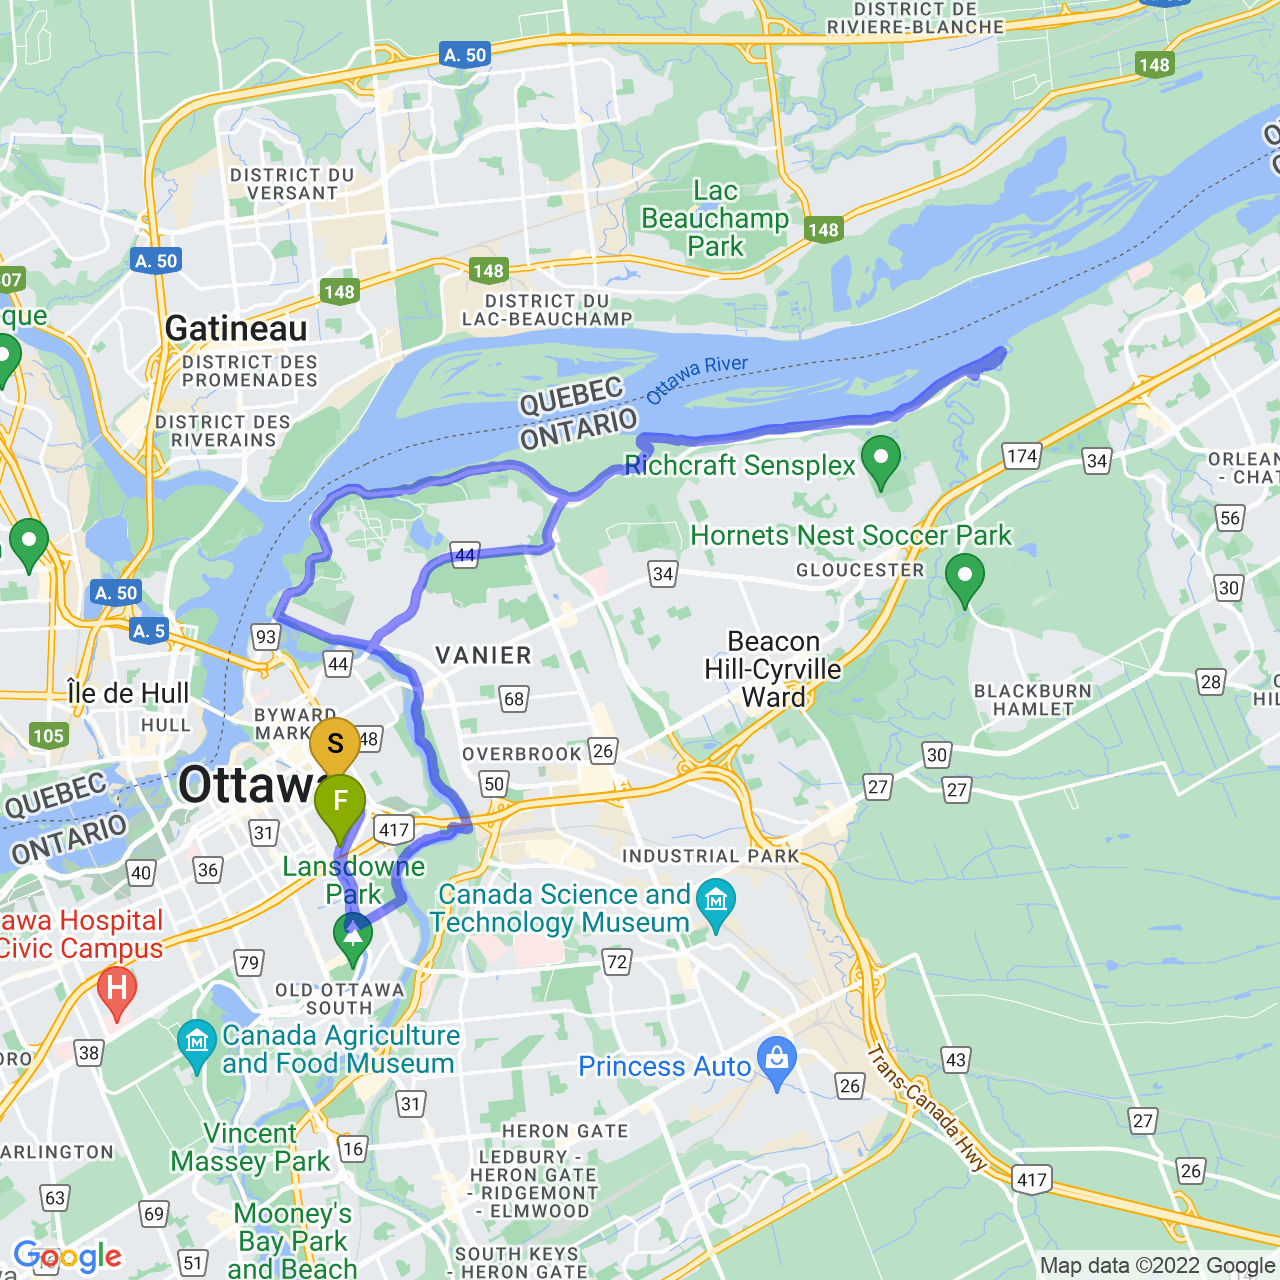 map of photo ride